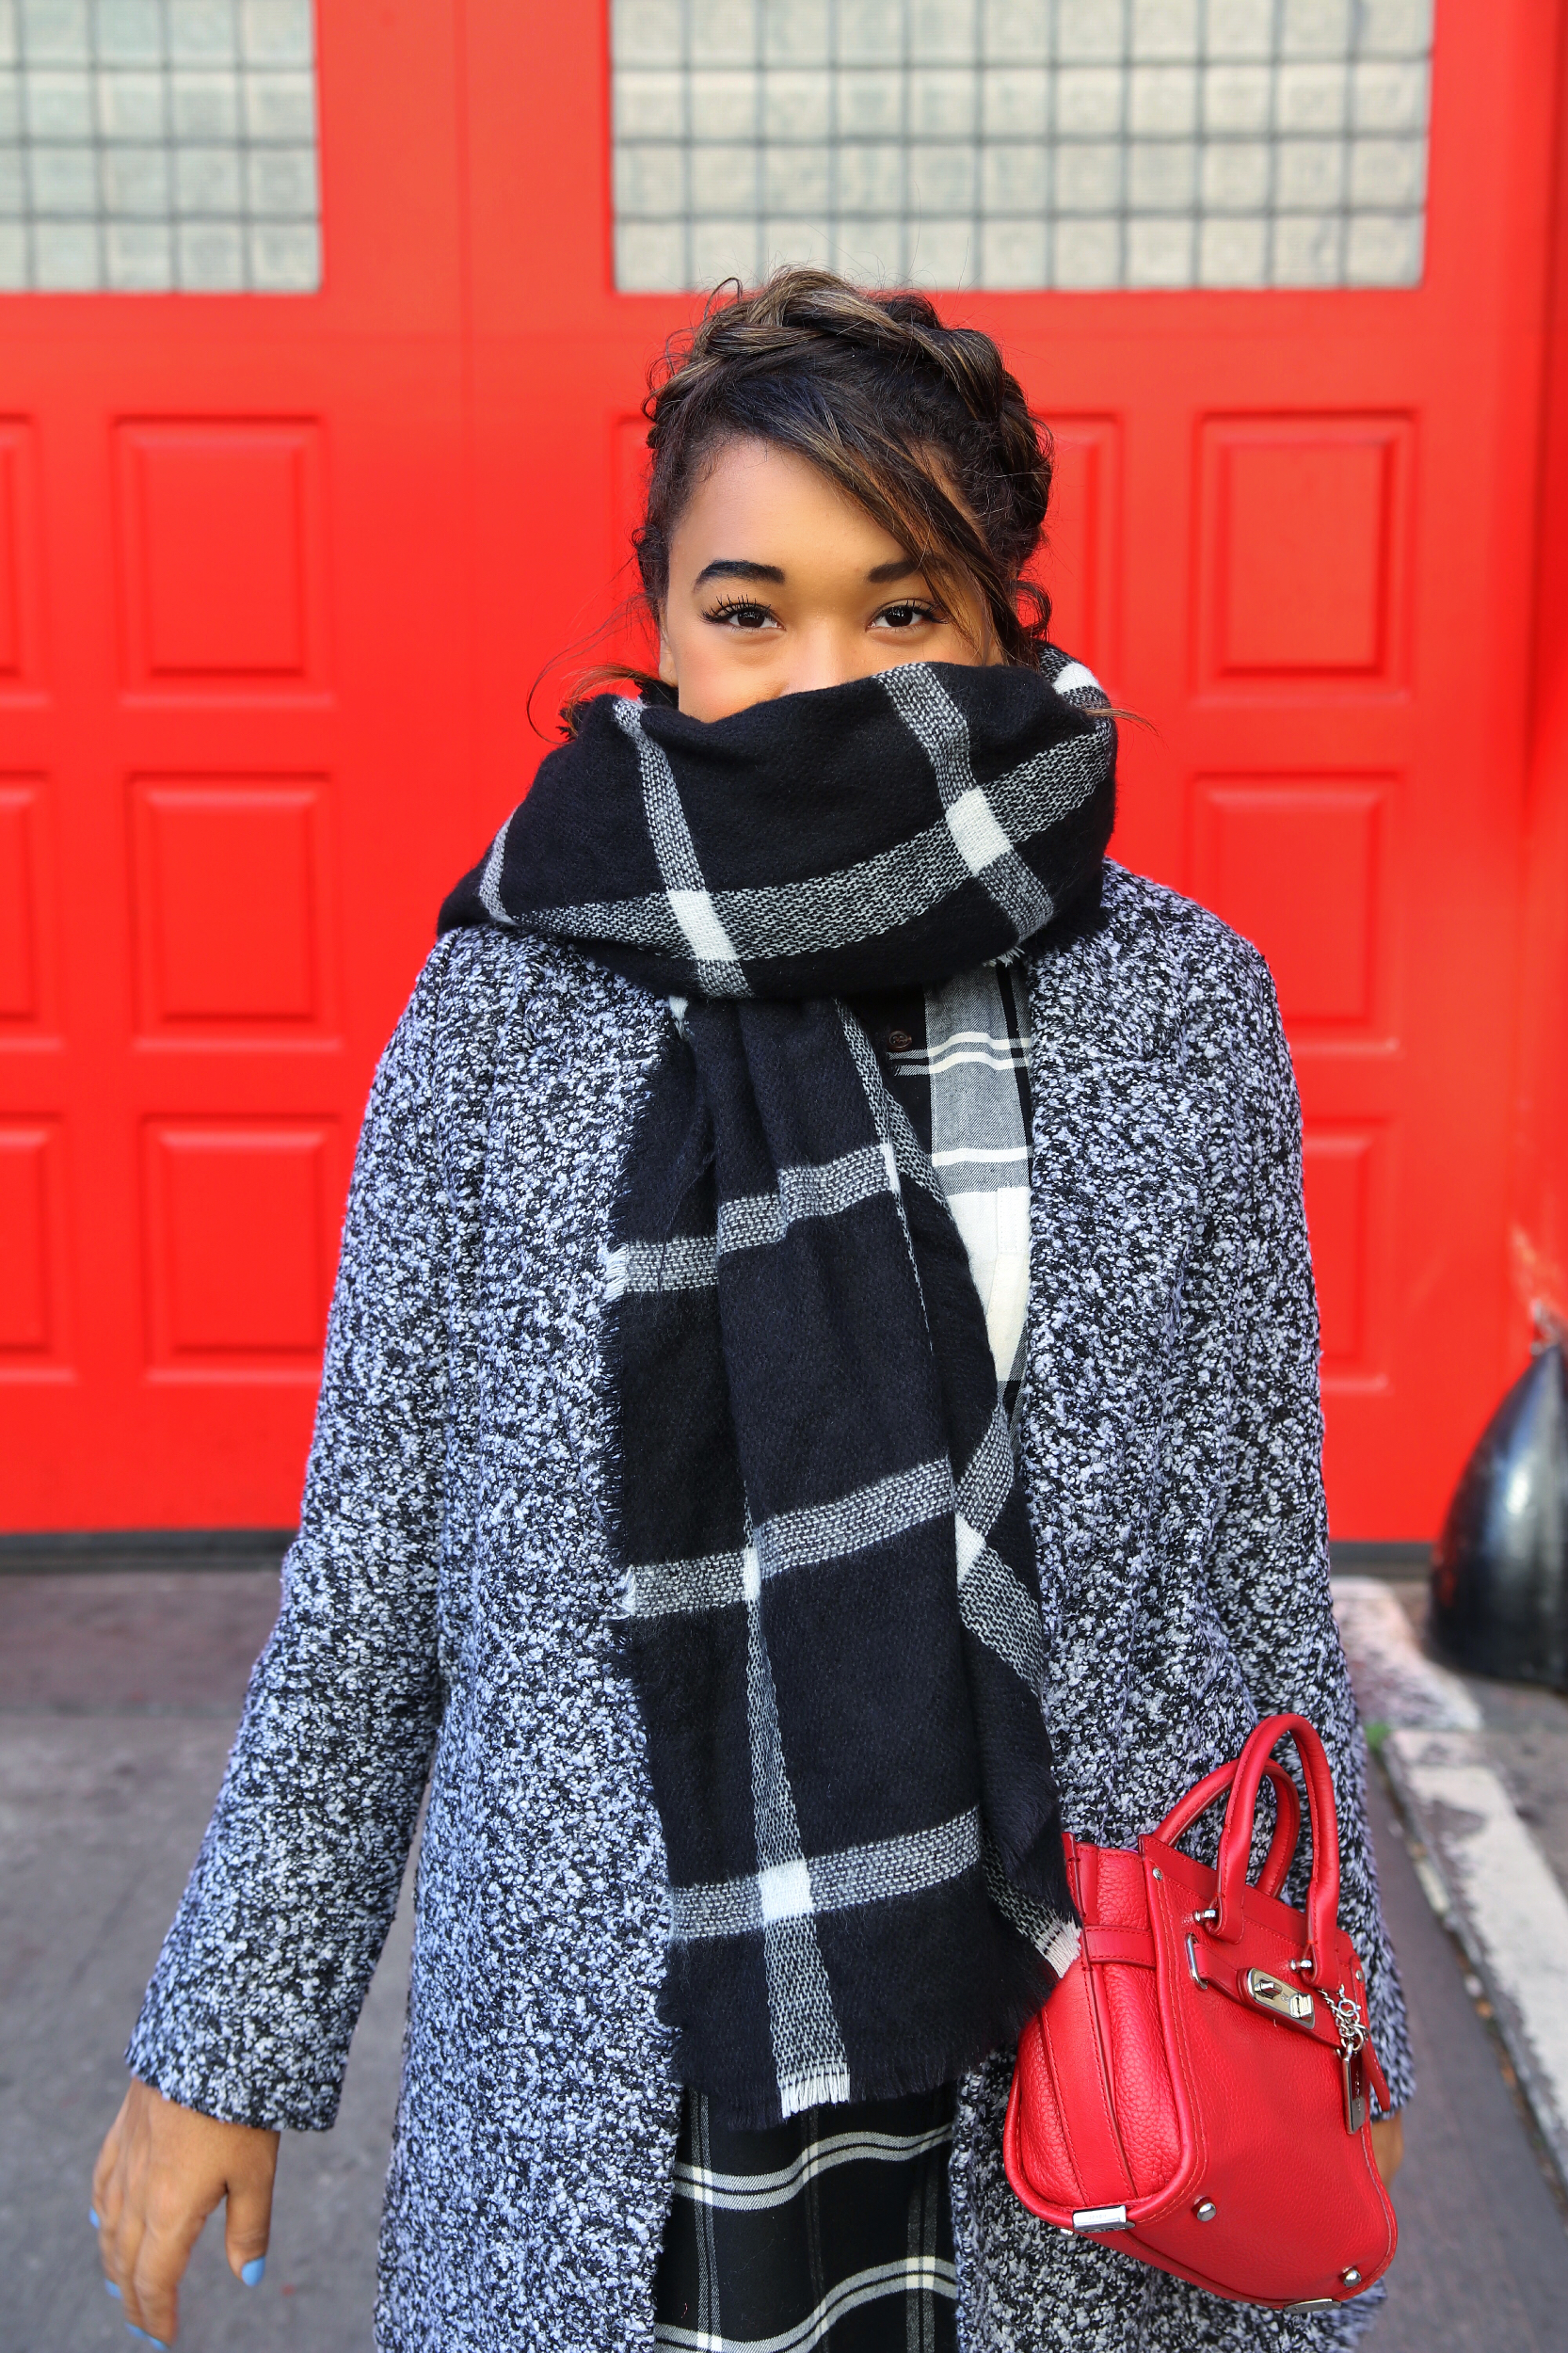 Big Plaid Blanket Scarf! Fall style by Color Me Courtney (@colormecourtney) // Bundle up in plaid for fall #plaid #blanketscarf #scarf #patternmixing #blackandwhite